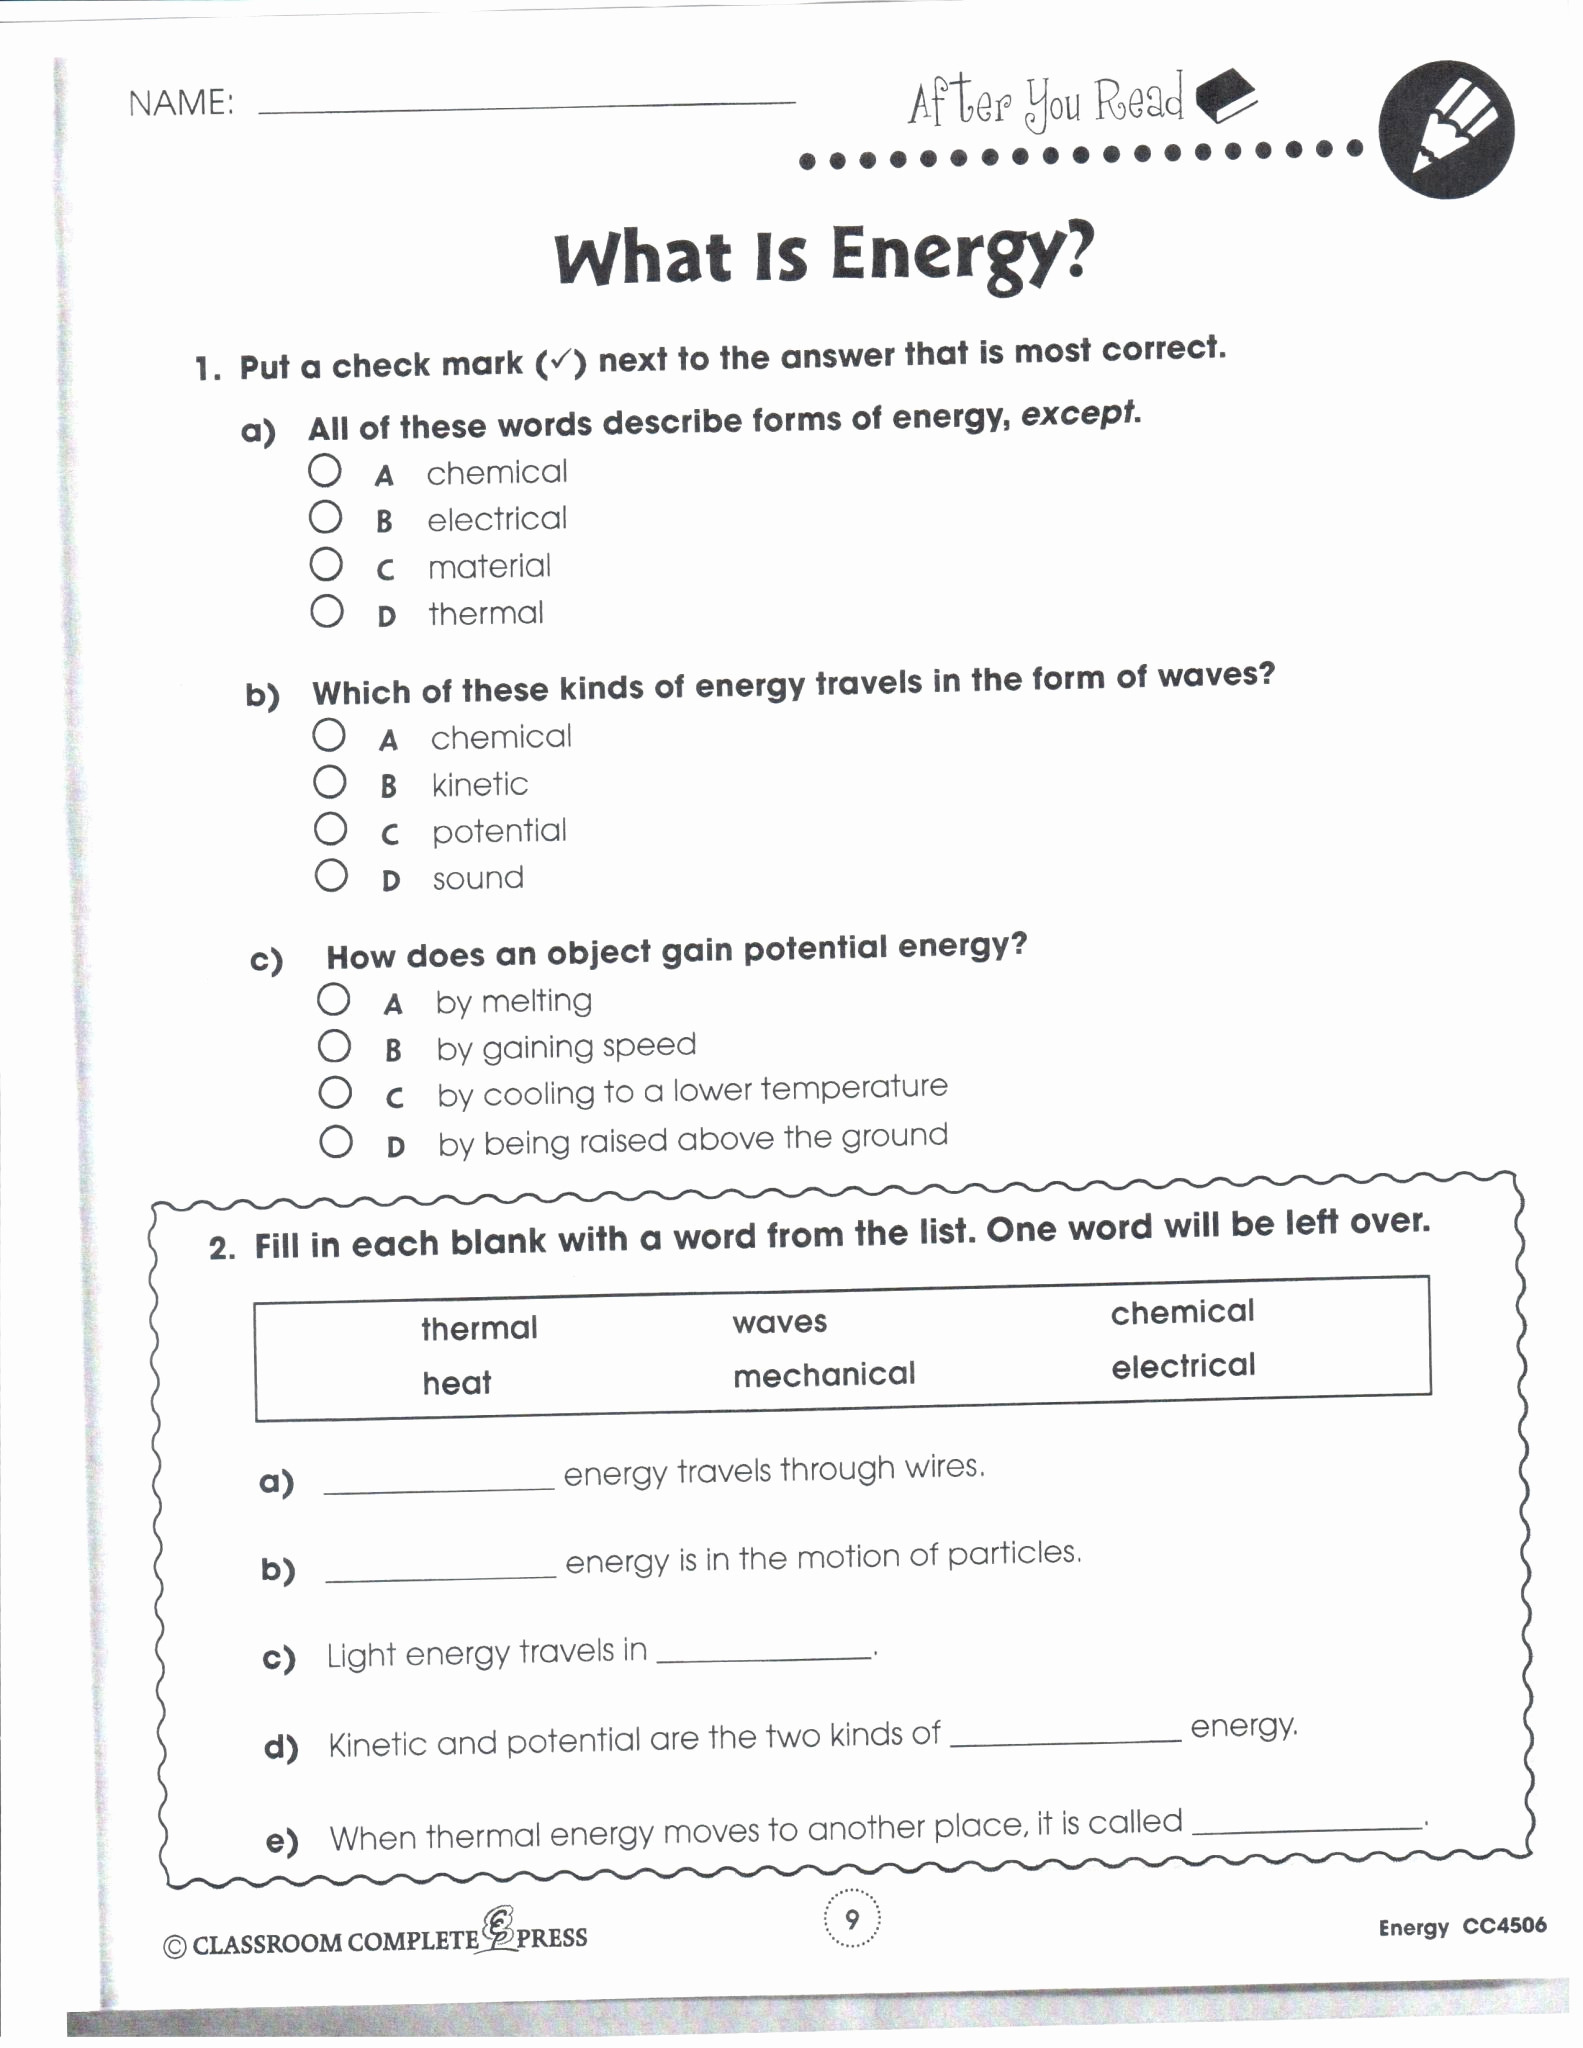 take-charge-today-worksheet-answers-db-excel